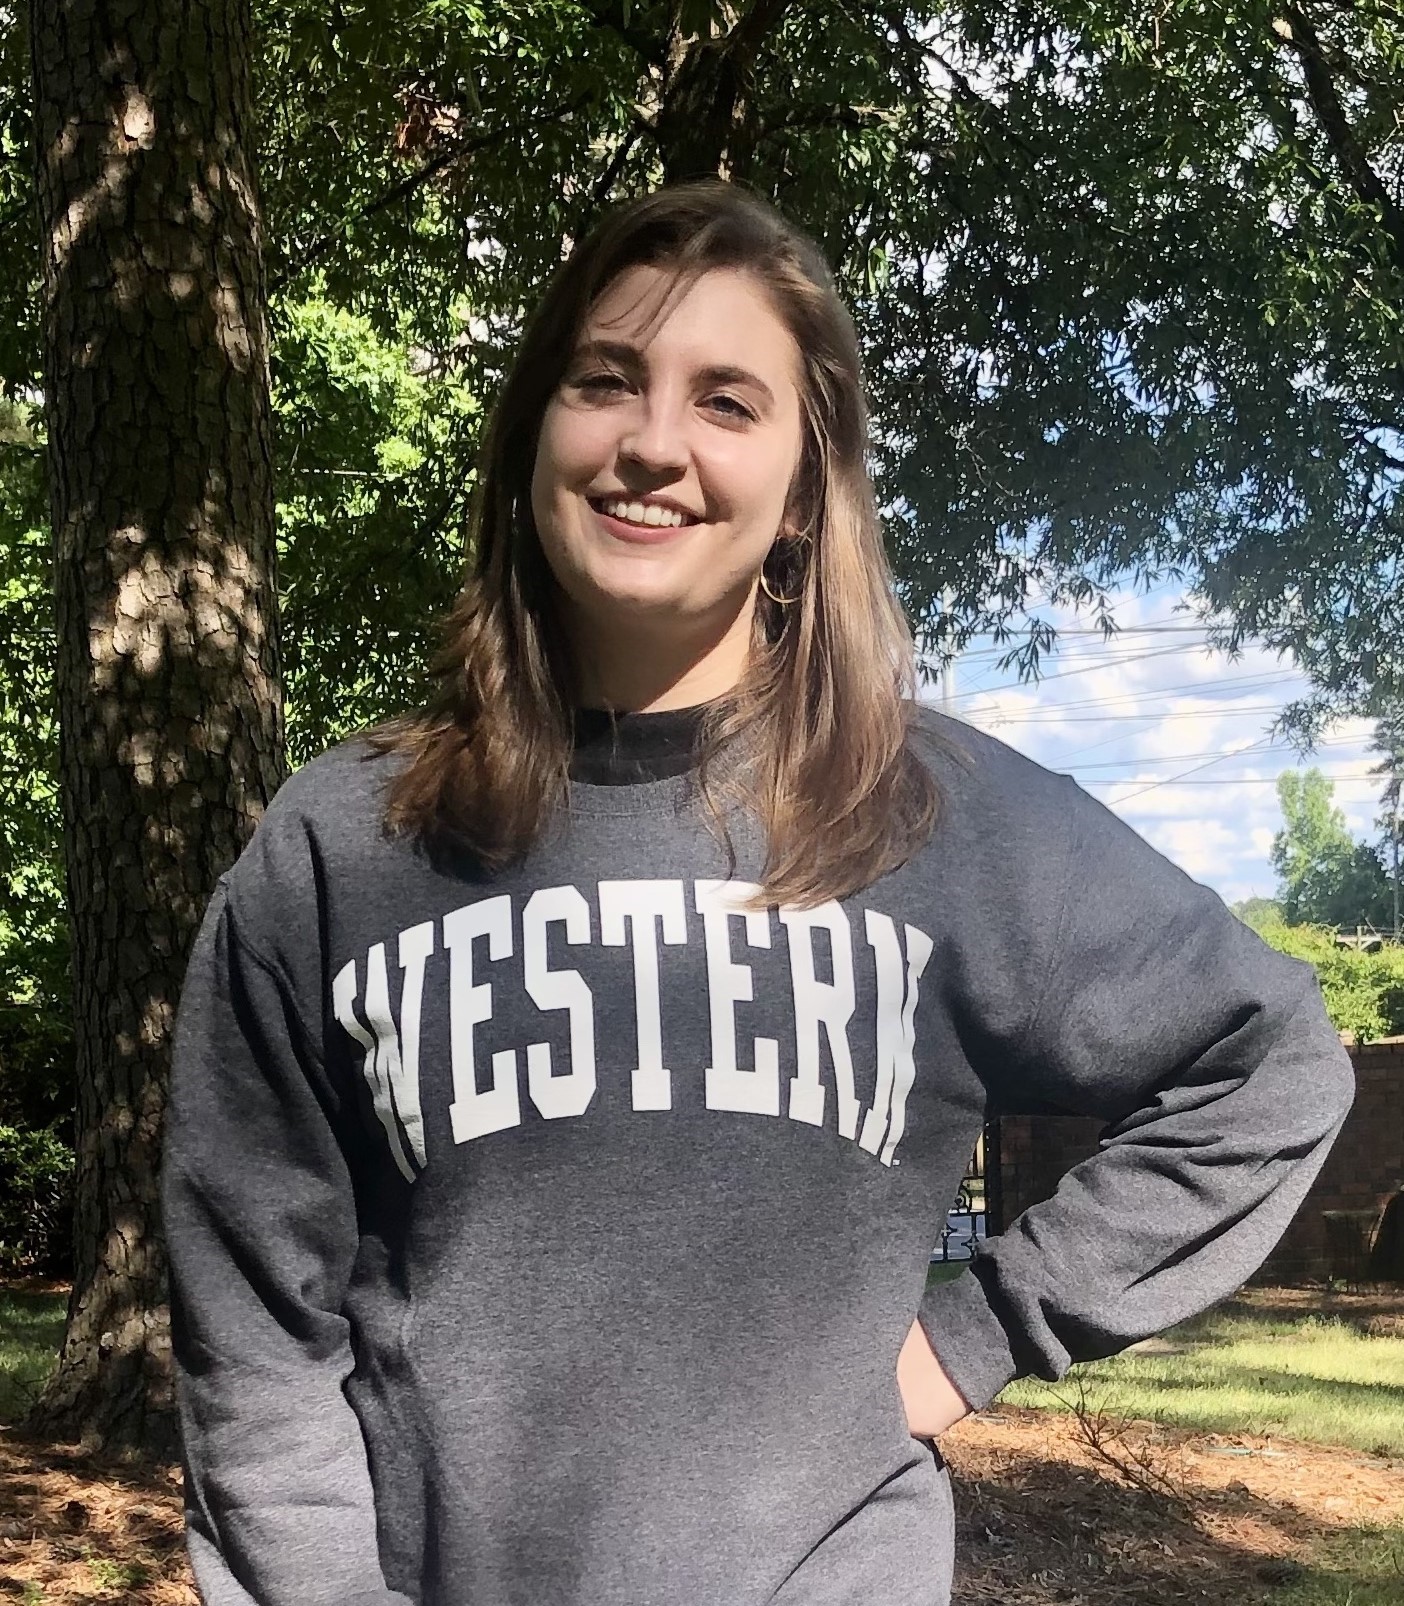 Lydia smiling and standing in front of trees wearing a grey sweatshirt with white text: "Western" and left hand on waist